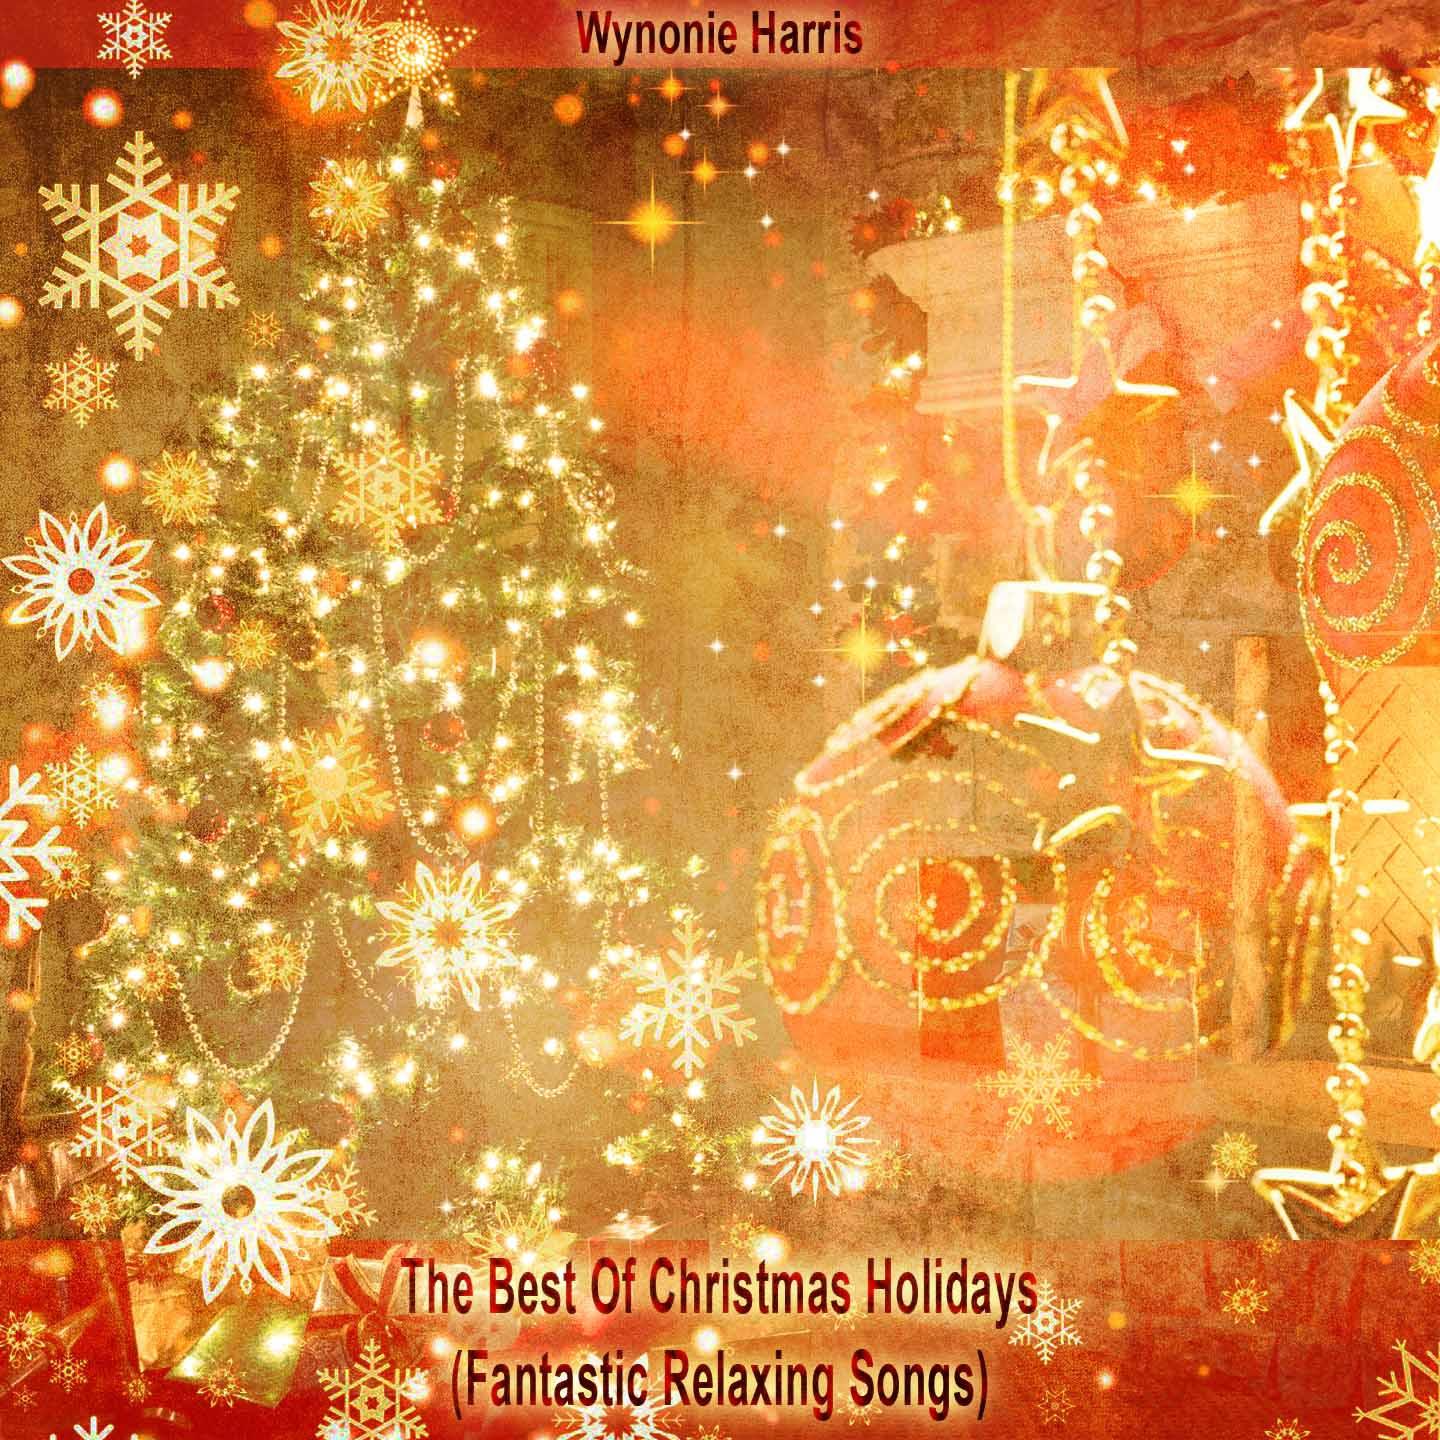 The Best Of Christmas Holidays (Fantastic Relaxing Songs)